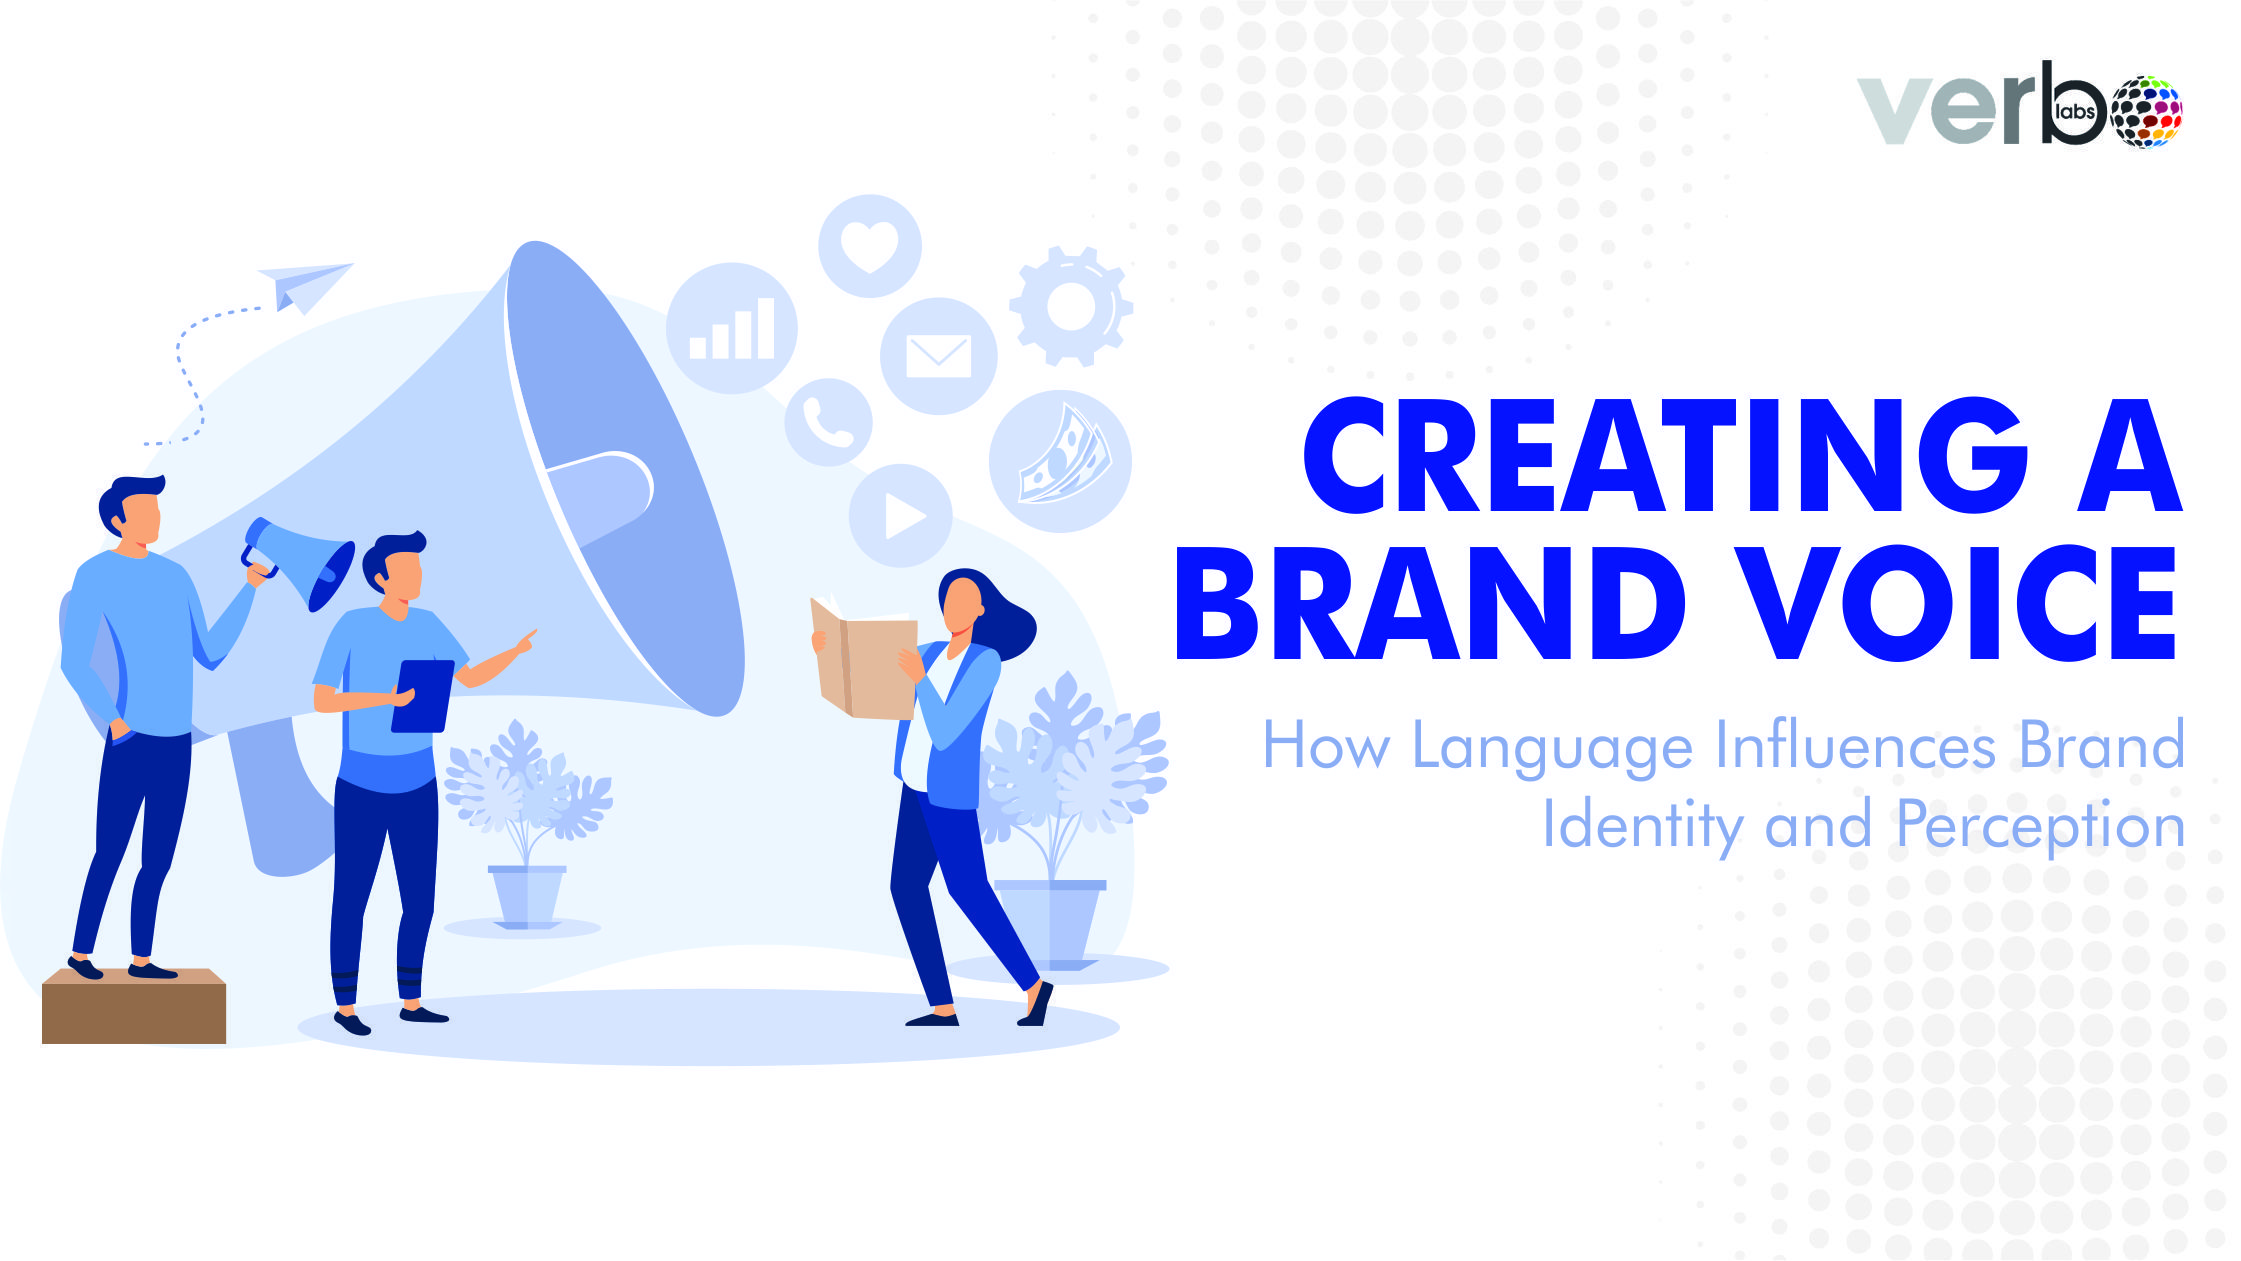 Creating a brand voice